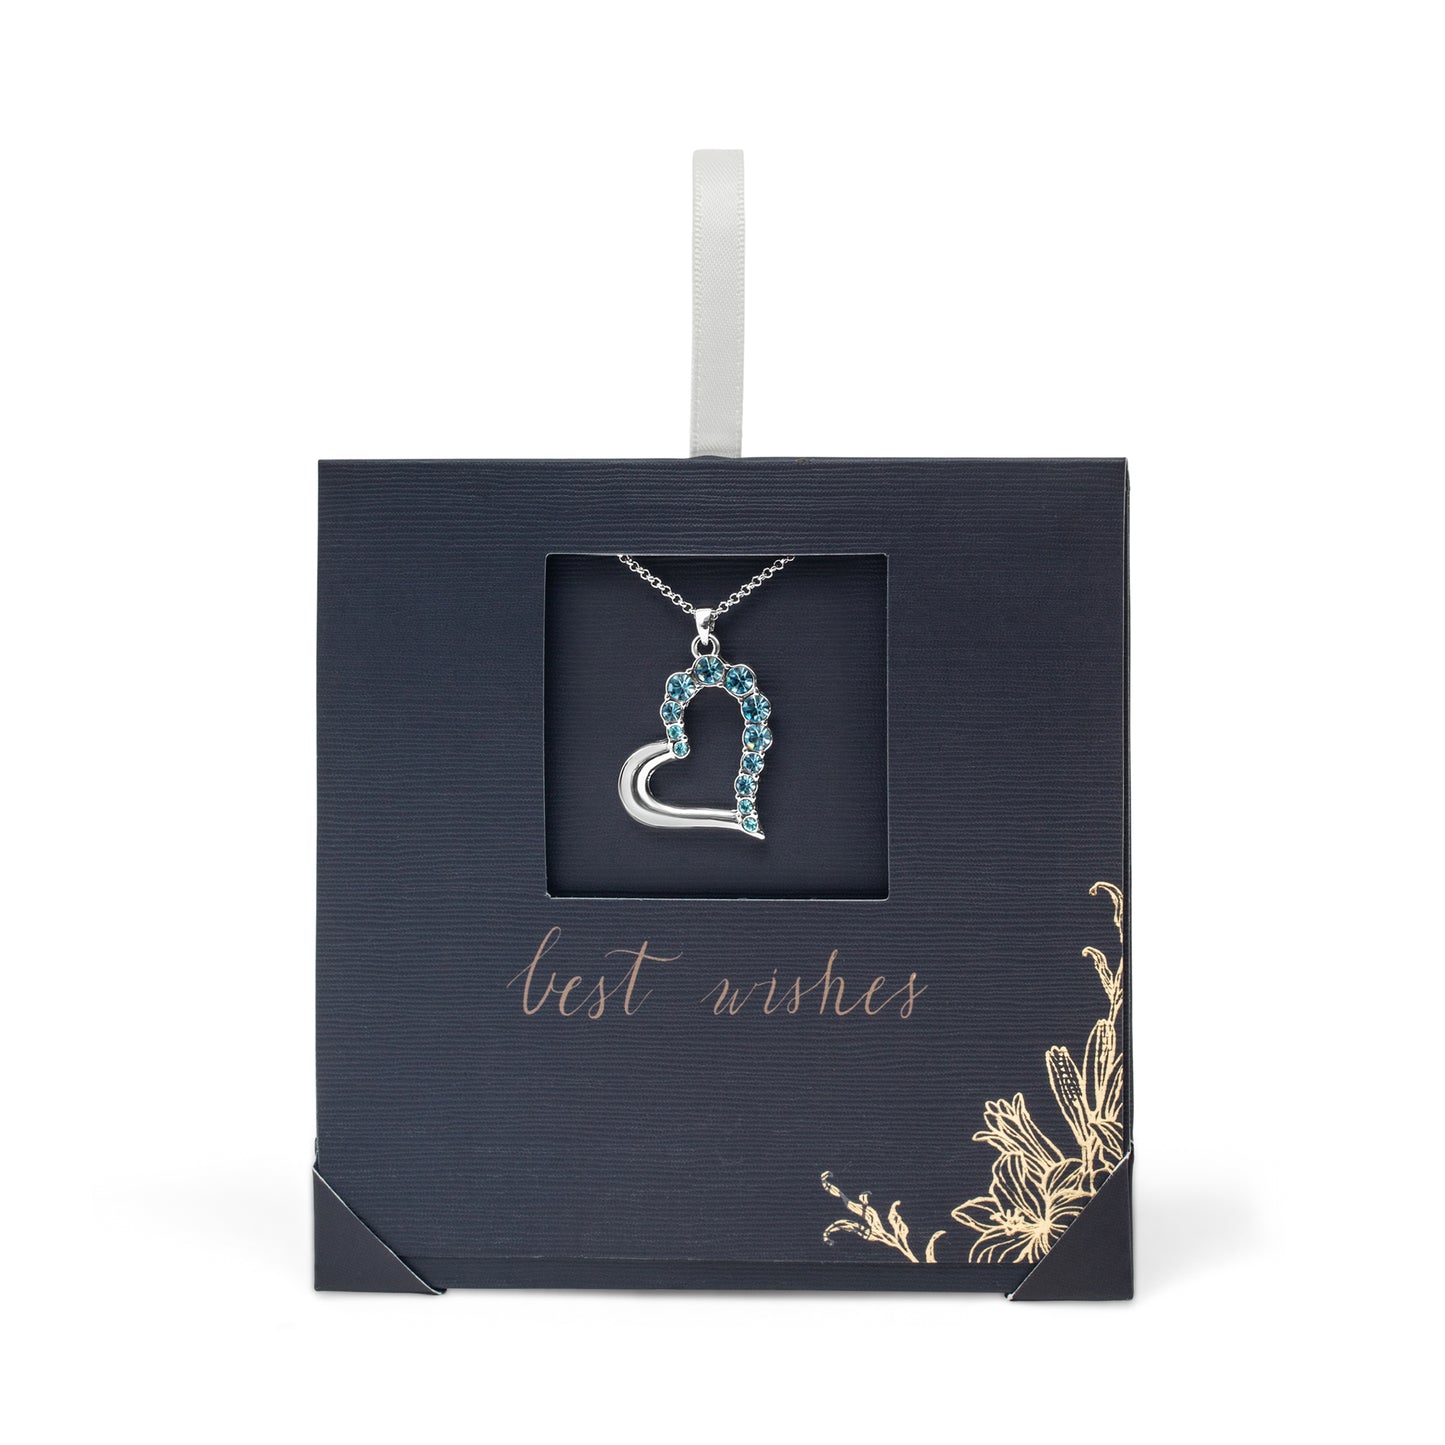 Silvertone Heart Pendant Necklace With Swarovski Crystals On Card